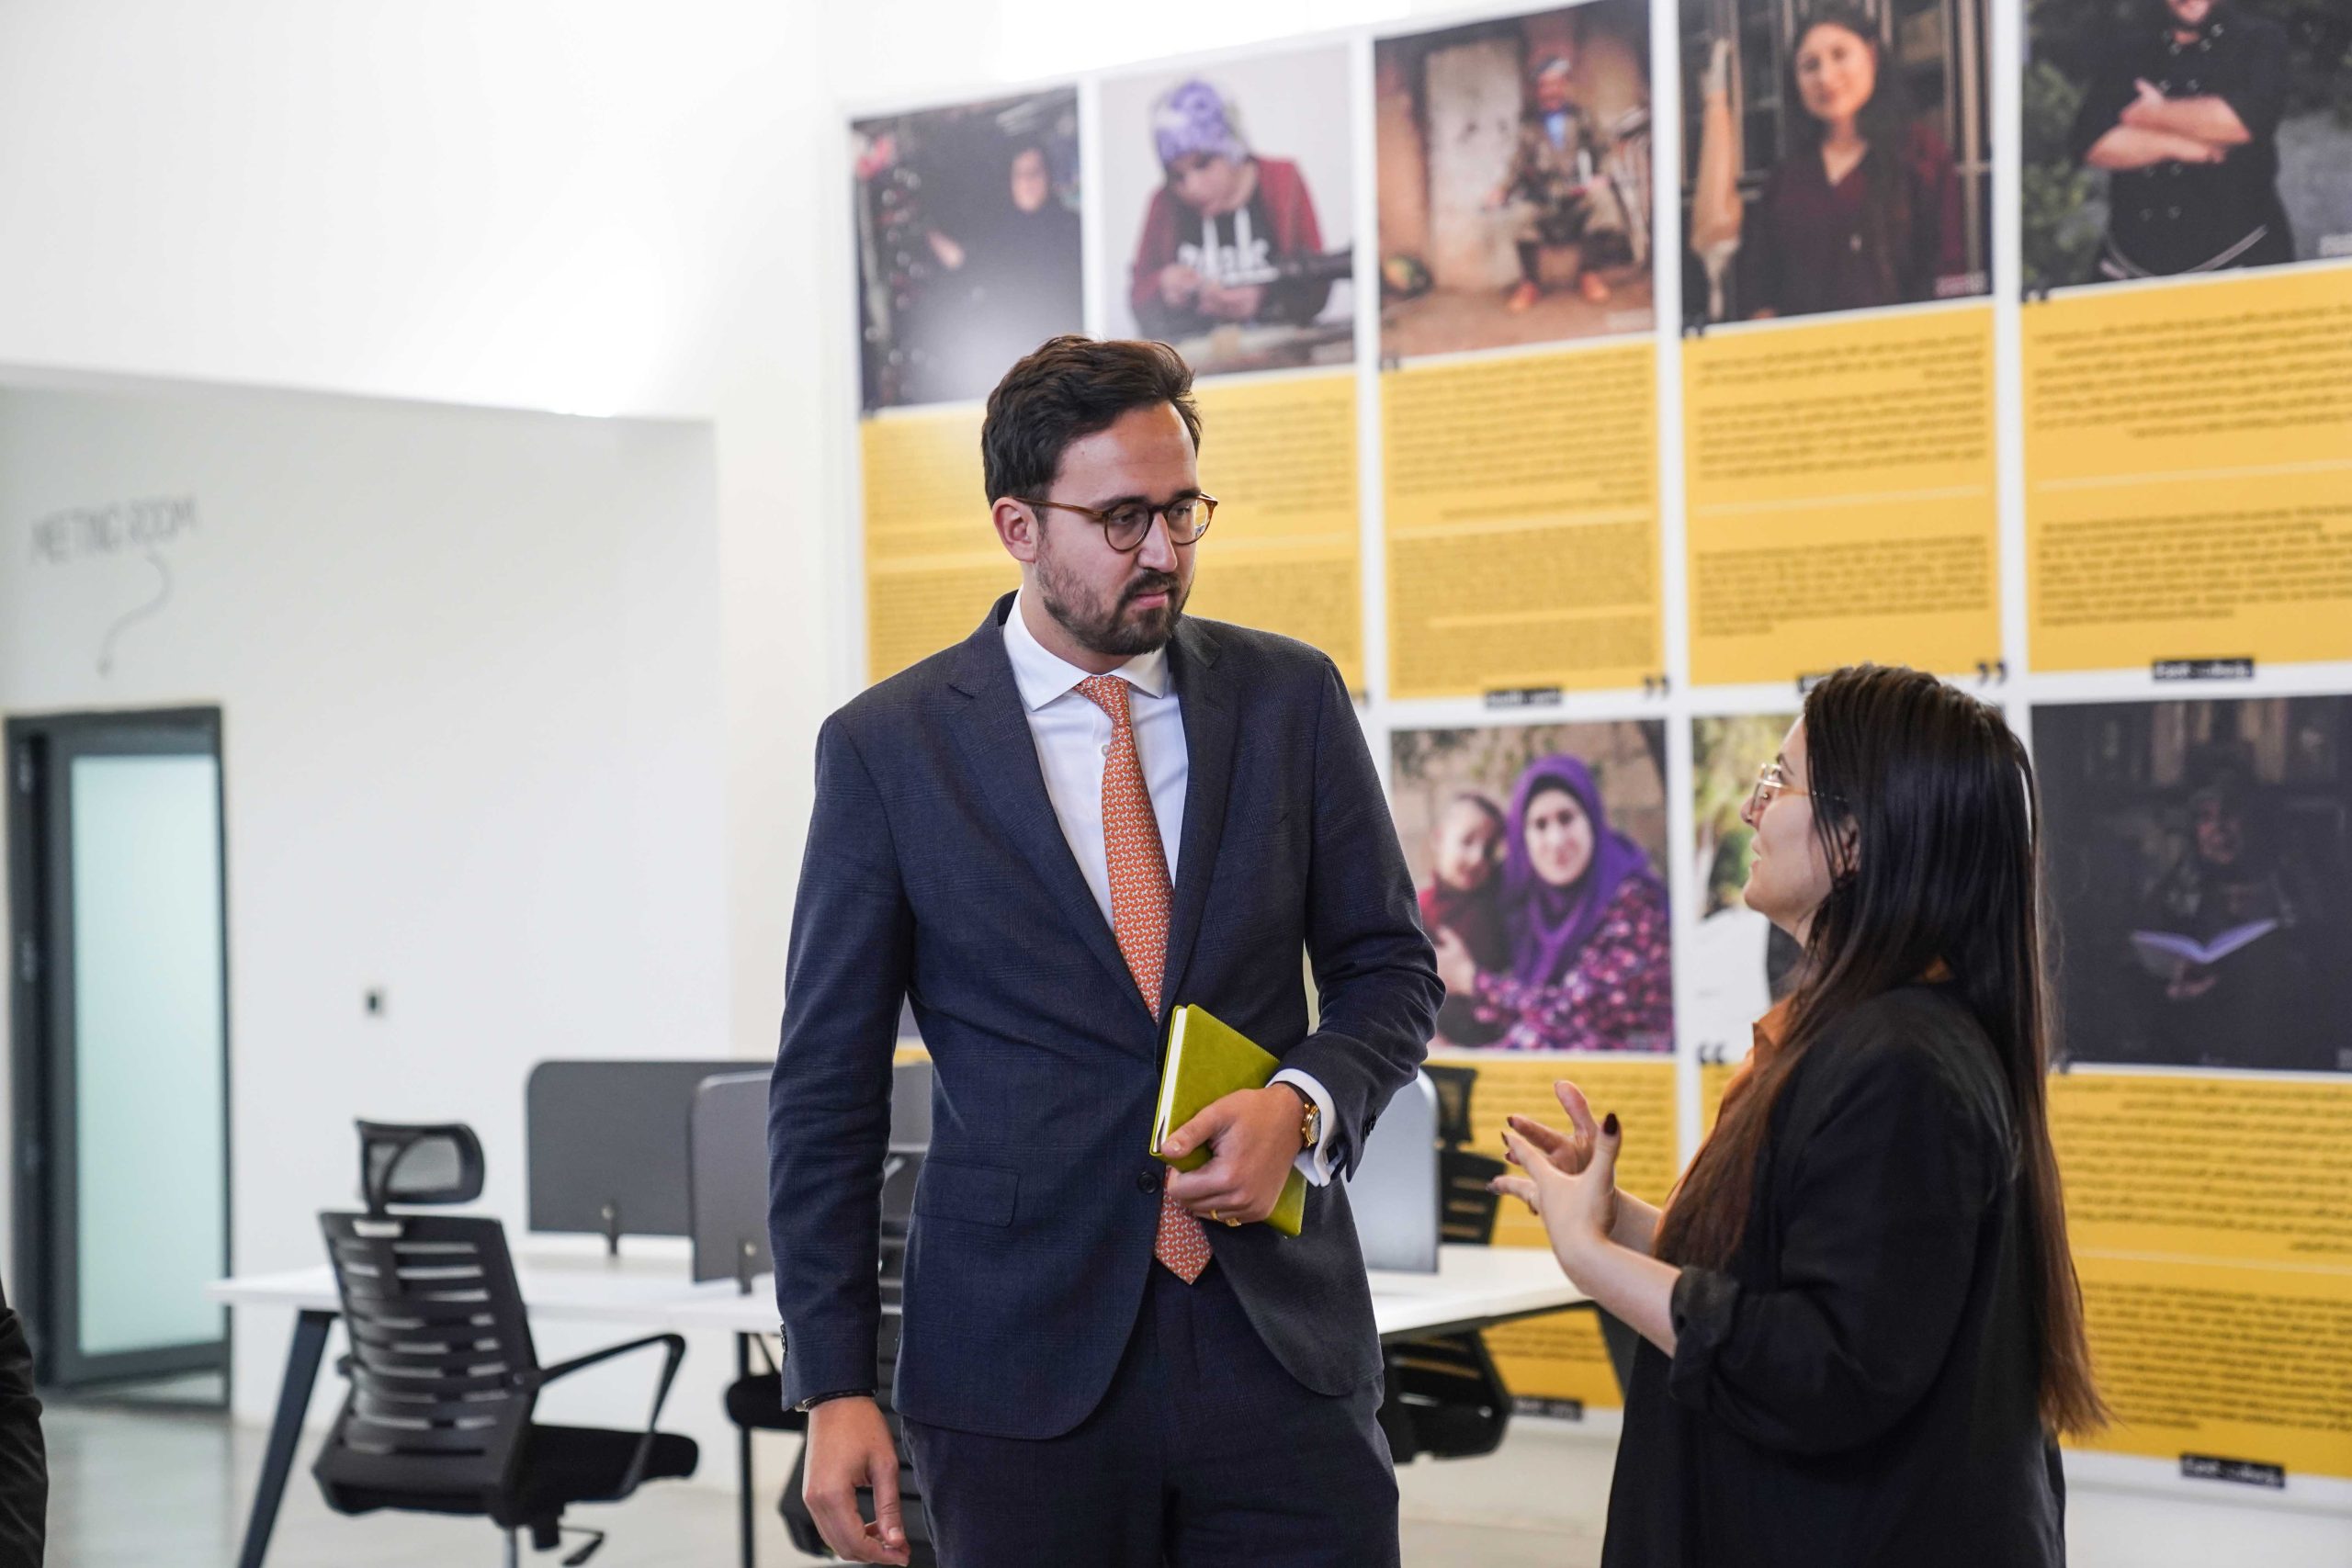 James Oates, the Head of the Political Section at the British Consulate-General Erbil in the Kurdistan Region, visited Vim Foundation, Artfrosh Project, and Kamaran Museum